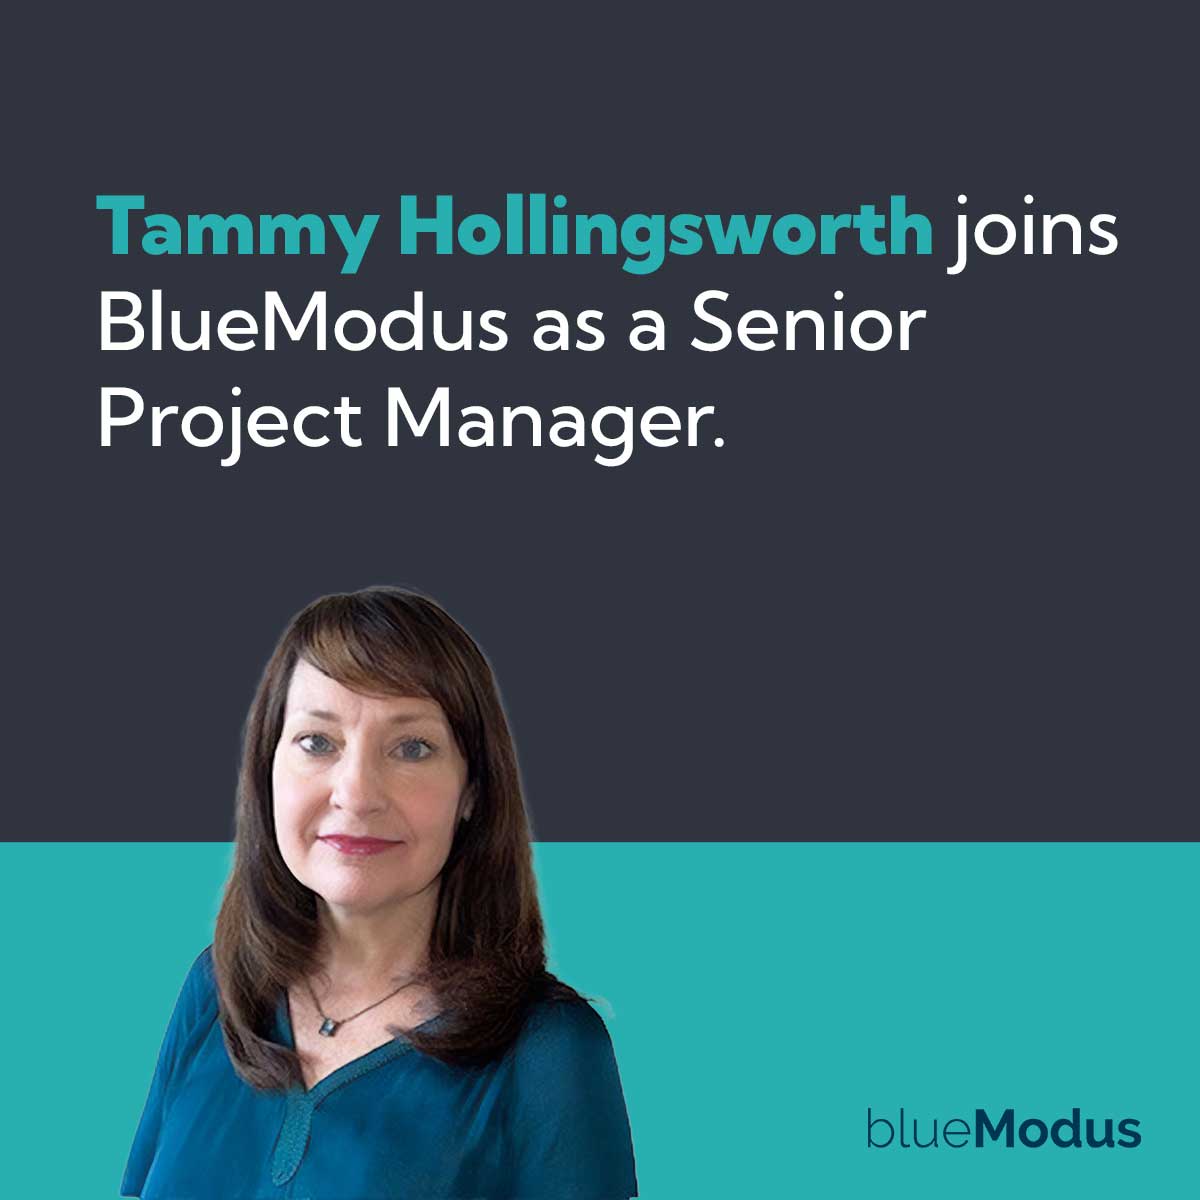 Tammy Hollingsworth Joins BlueModus as Senior Project Manager